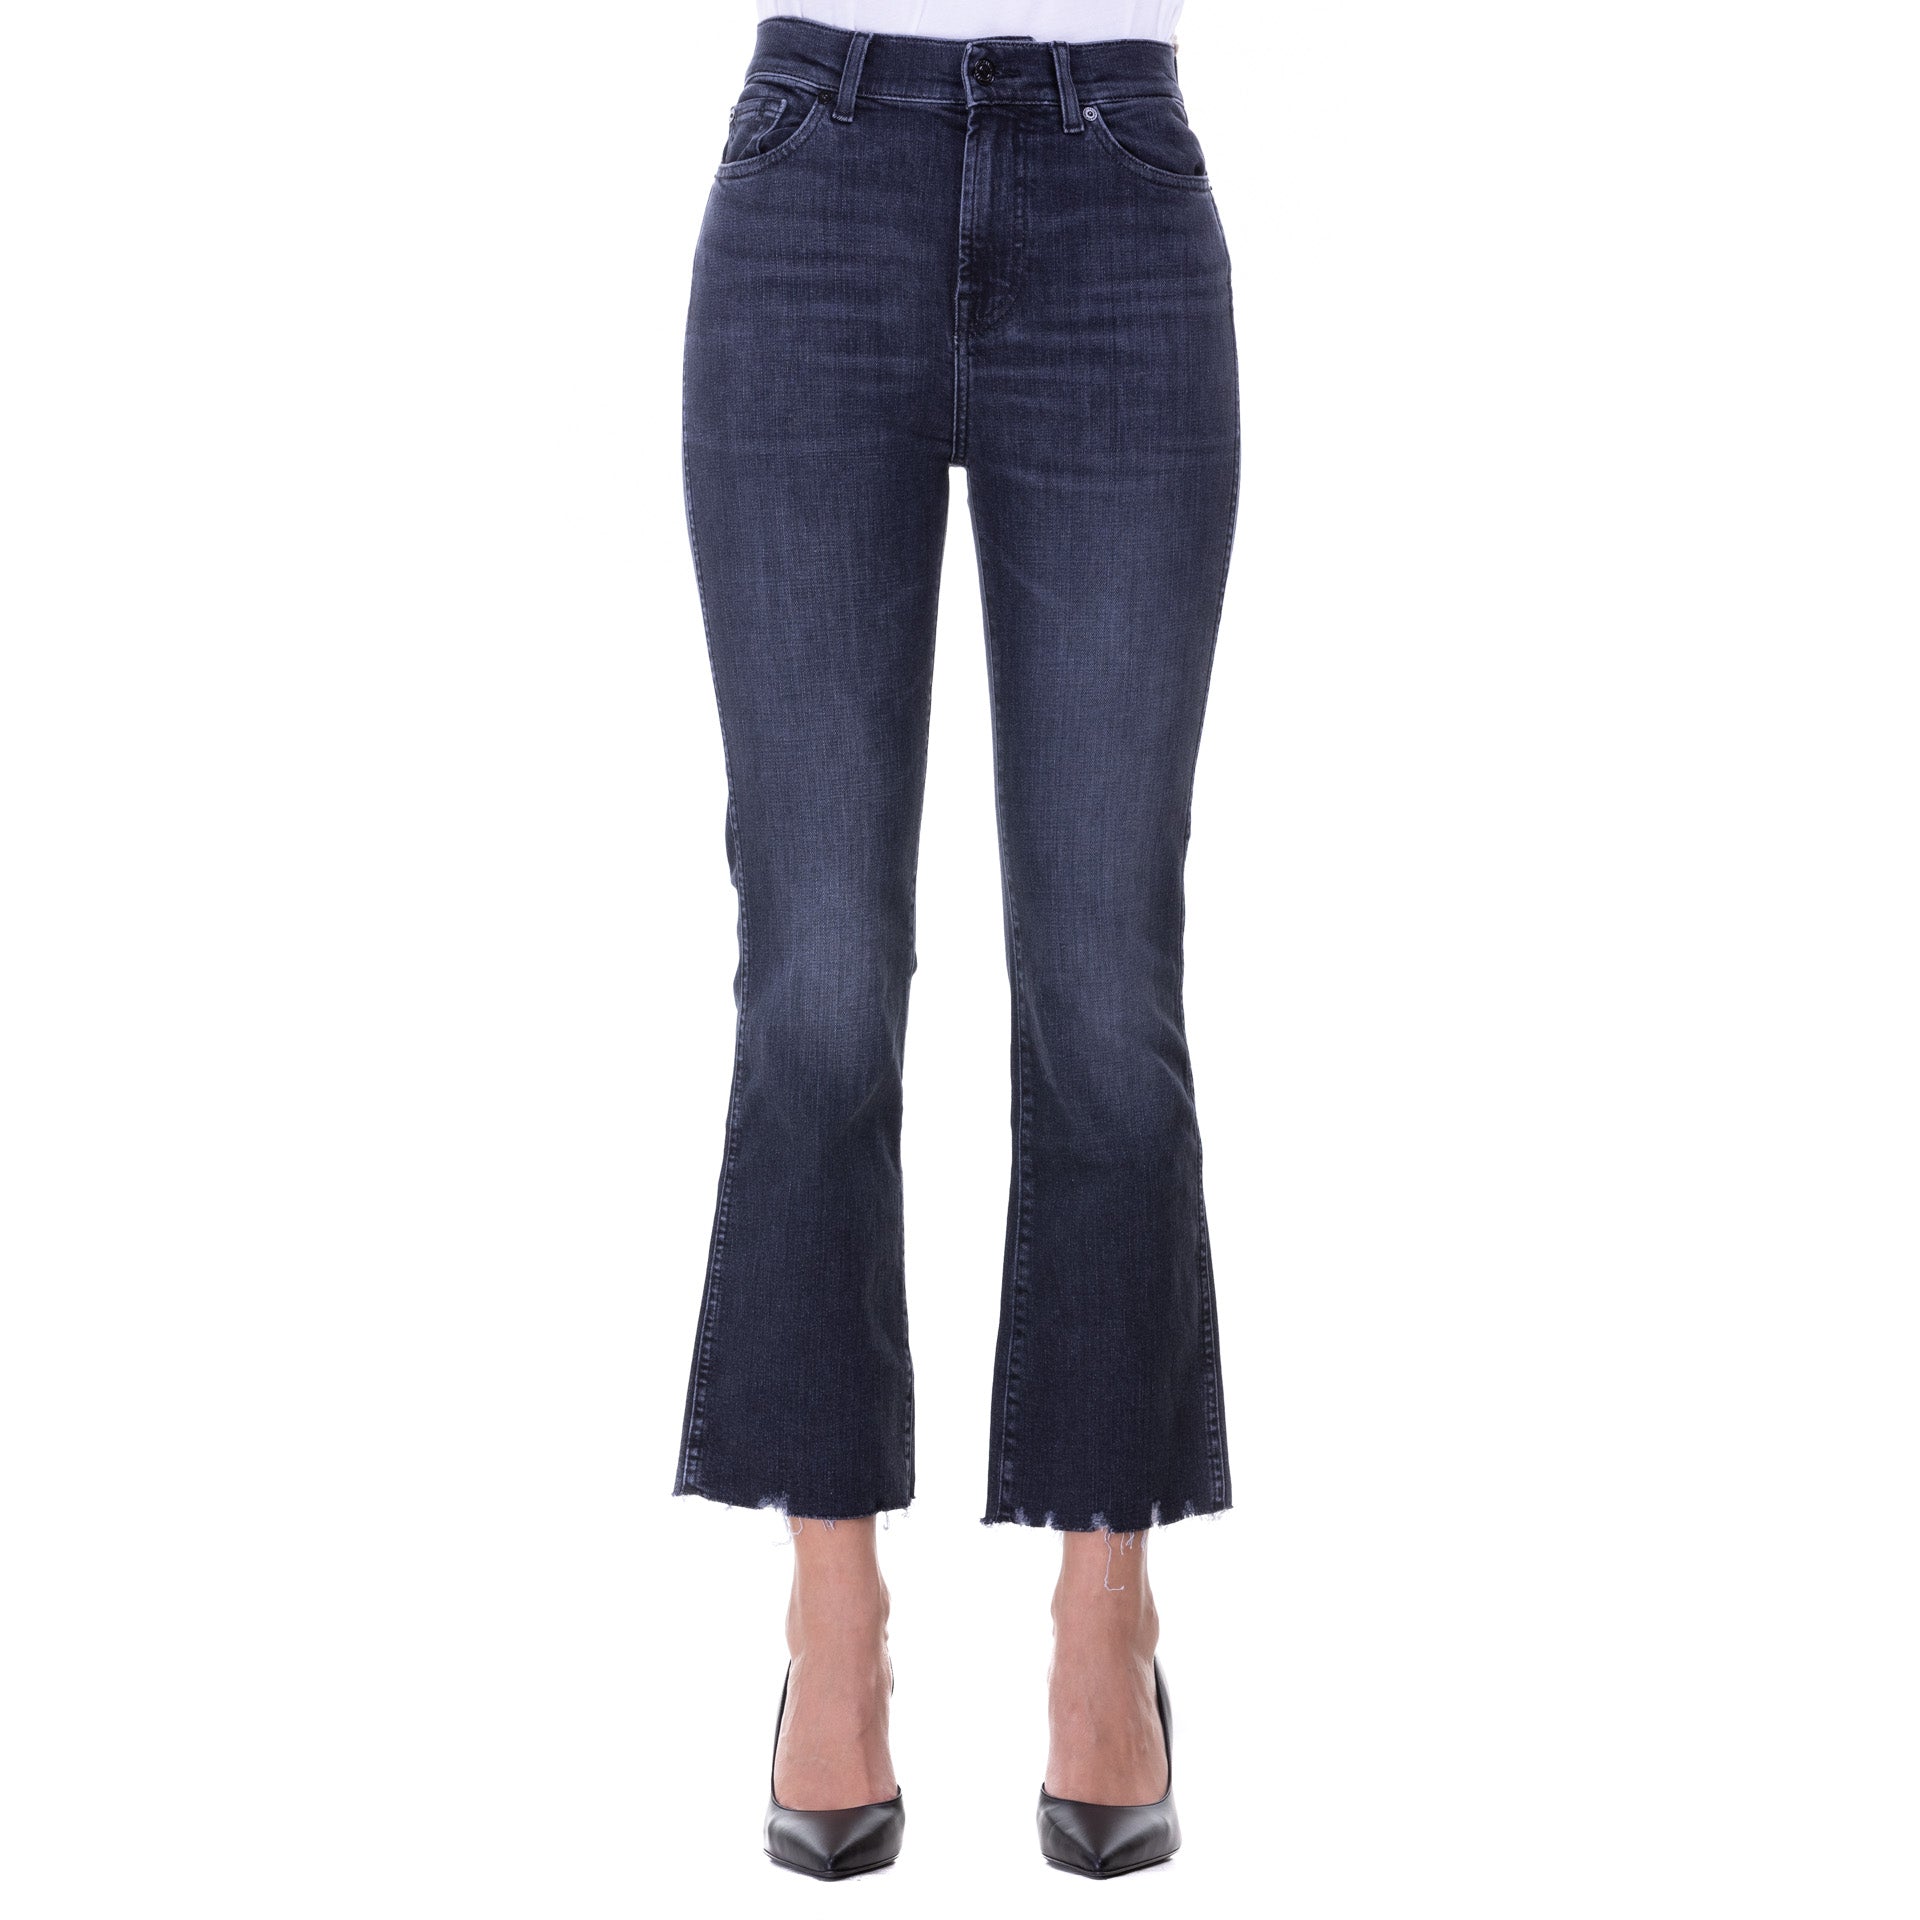 JEANS 7 FOR ALL MANKIND - Avant-gardeandria